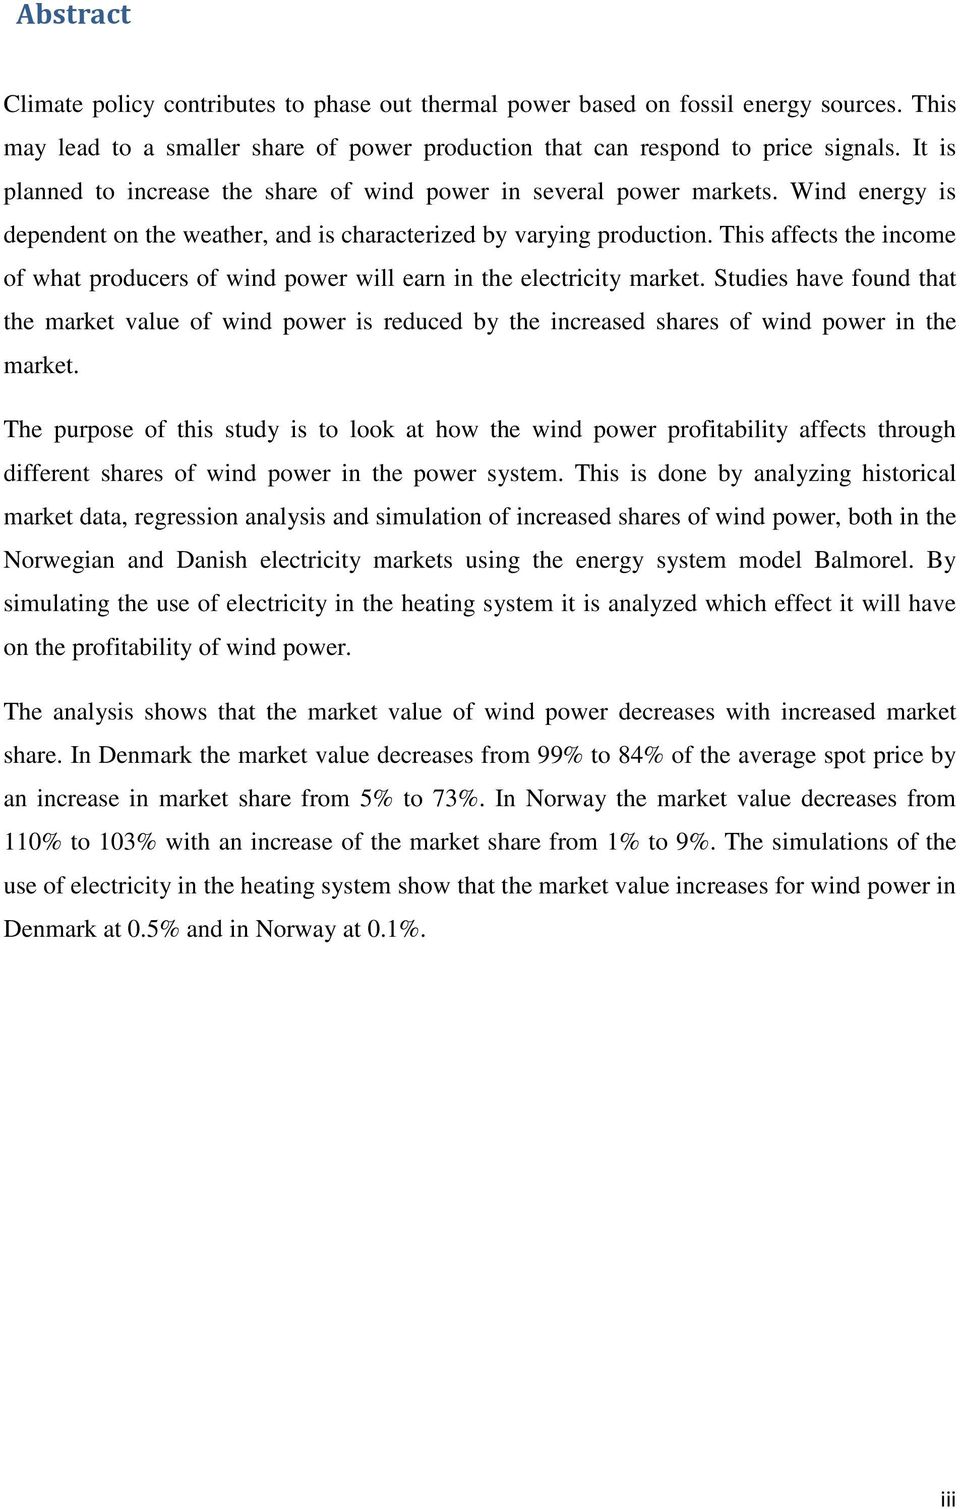 This affects the income of what producers of wind power will earn in the electricity market.